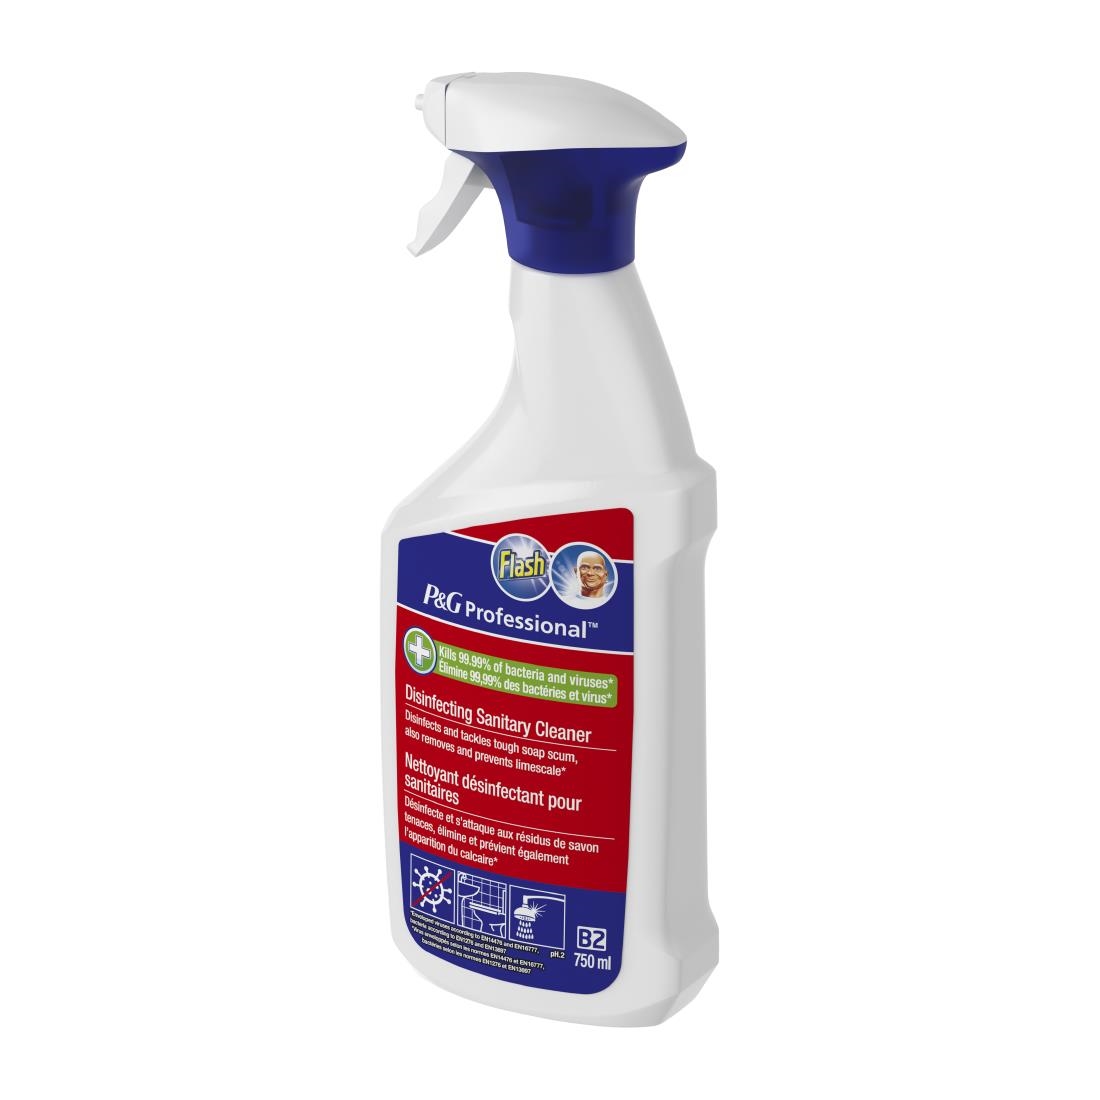 Flash Professional Disinfecting Sanitary Cleaner 750ml Pack of 10 (DX569)